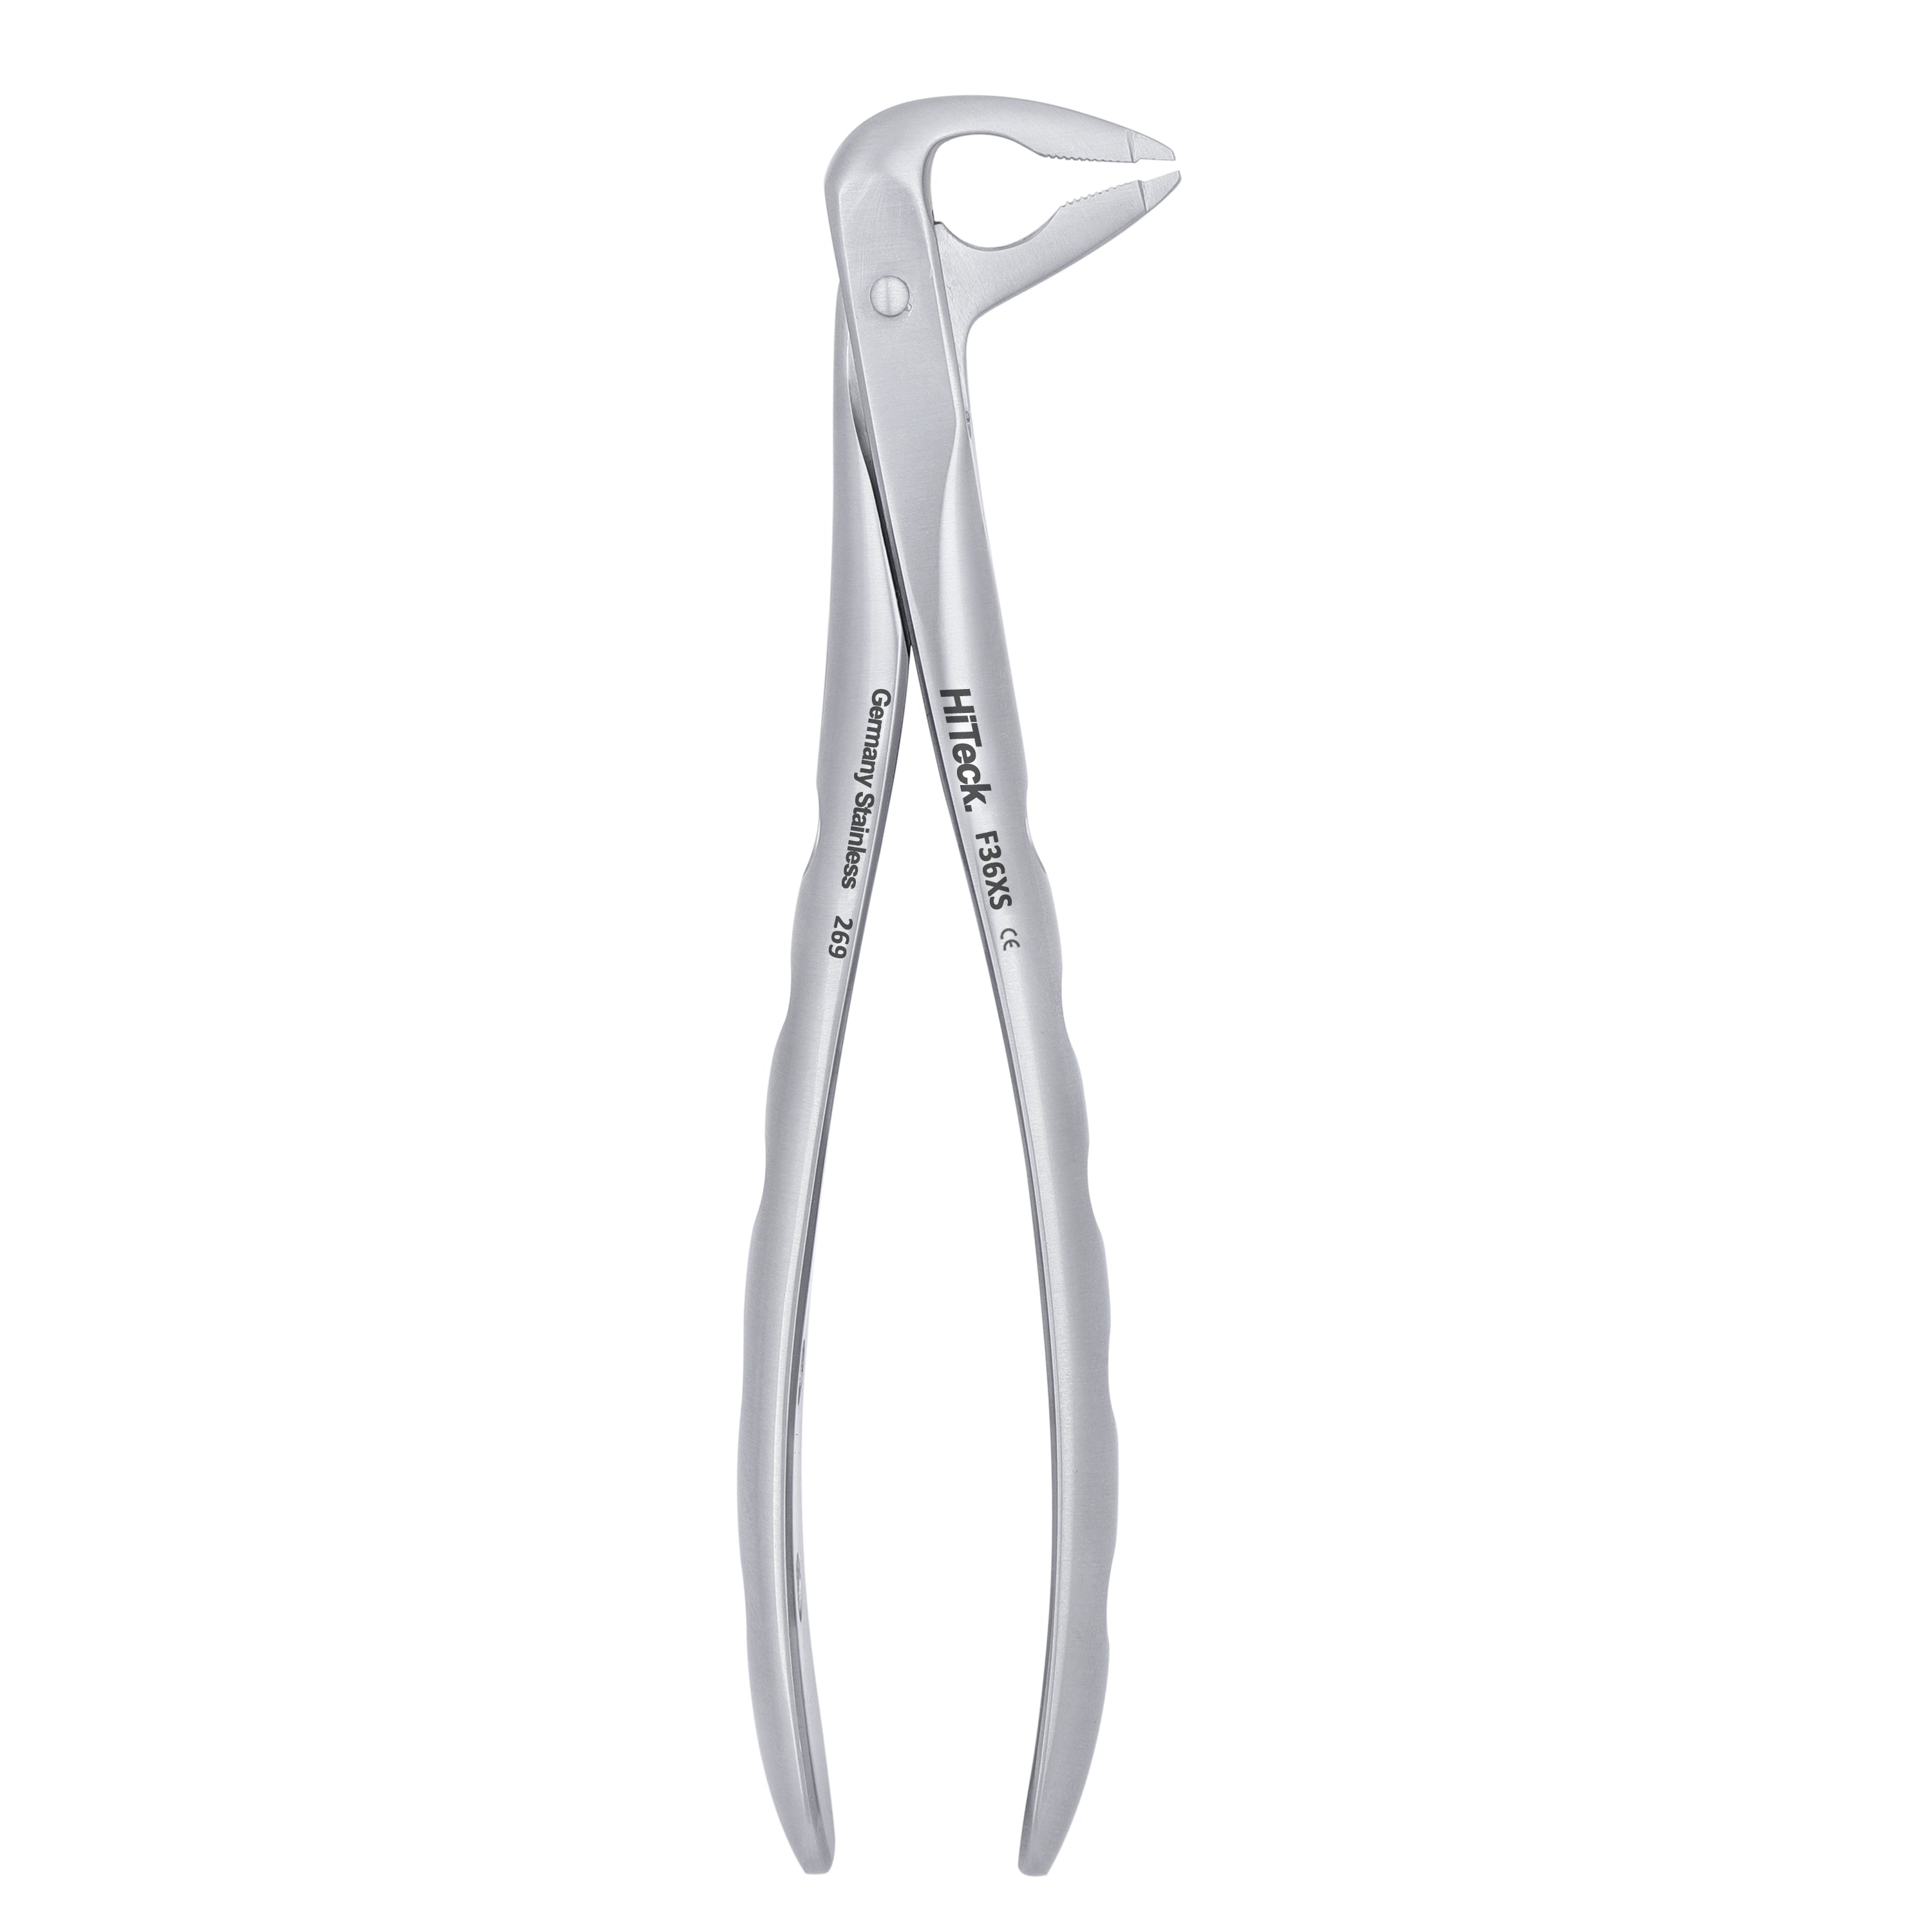 36 Lower Incisors Atraumair Extraction Forceps - HiTeck Medical Instruments